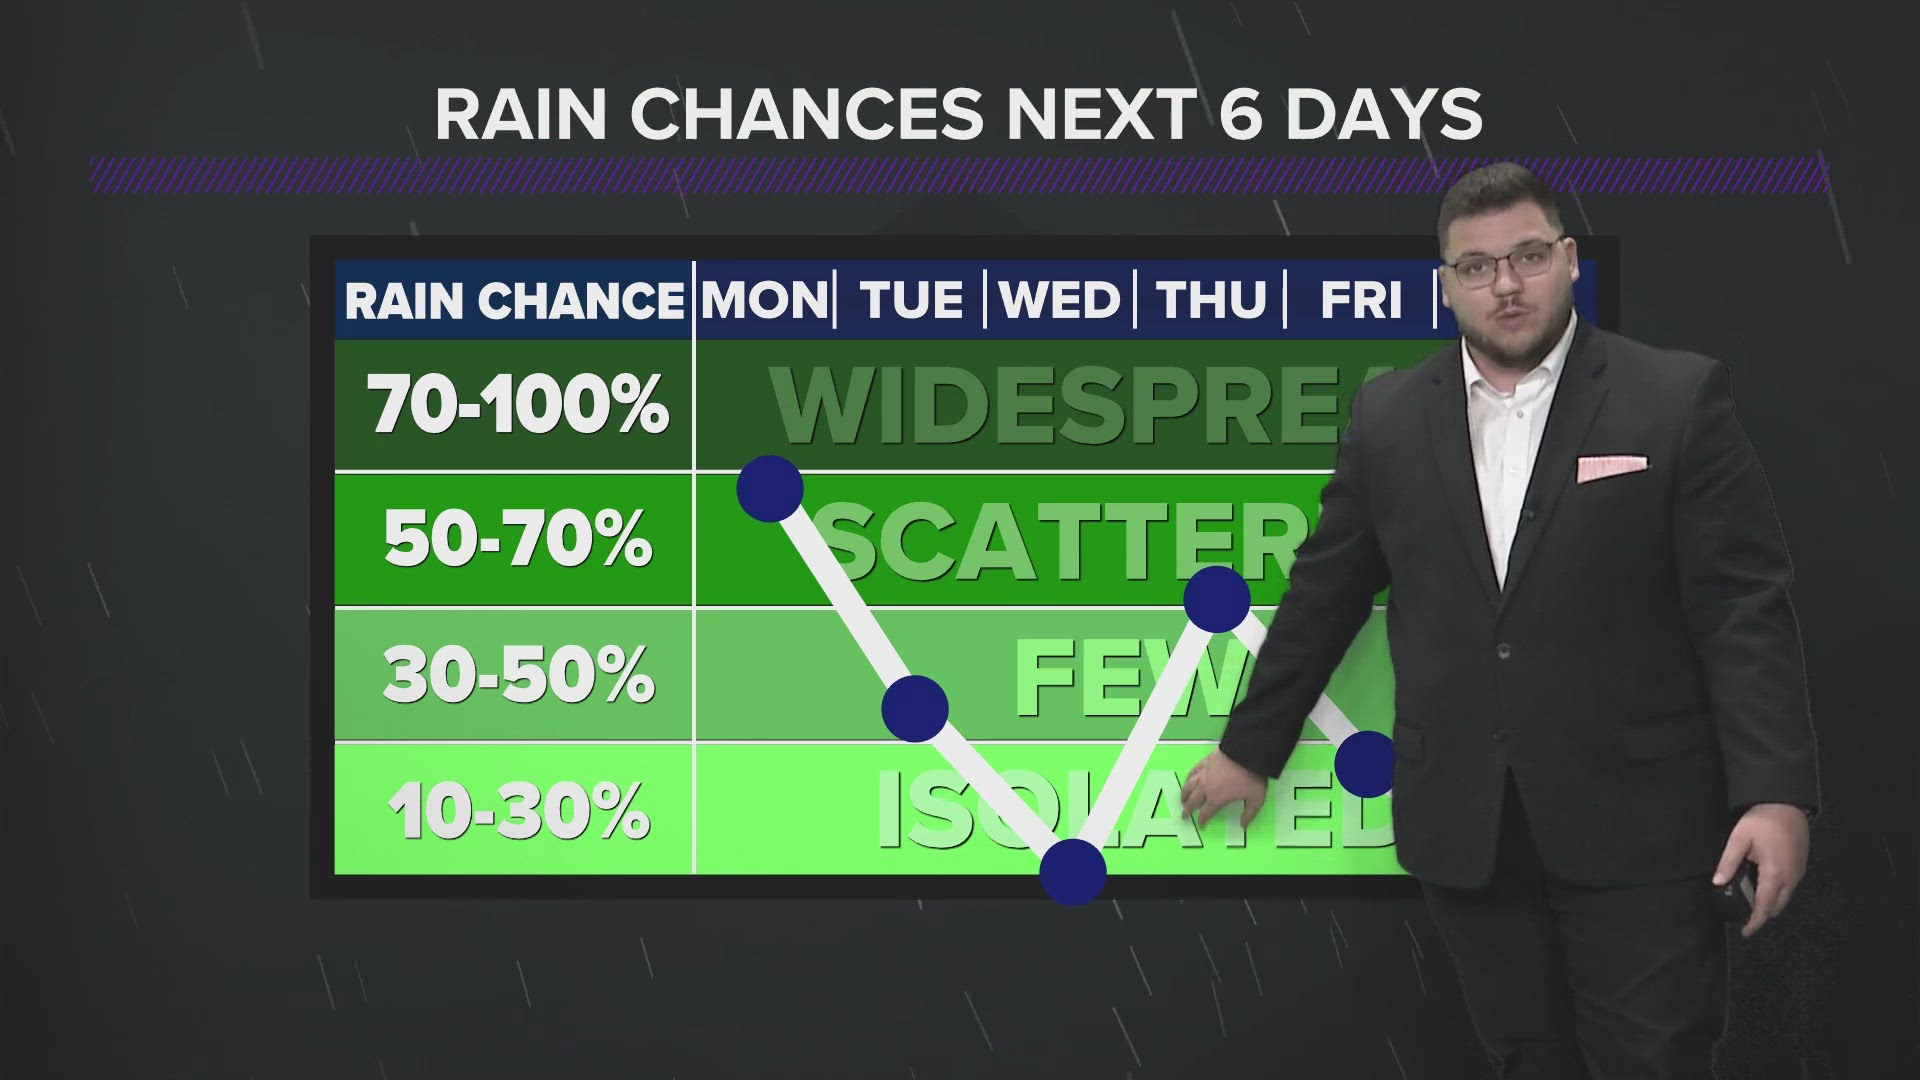 Rain chances scattered through the week